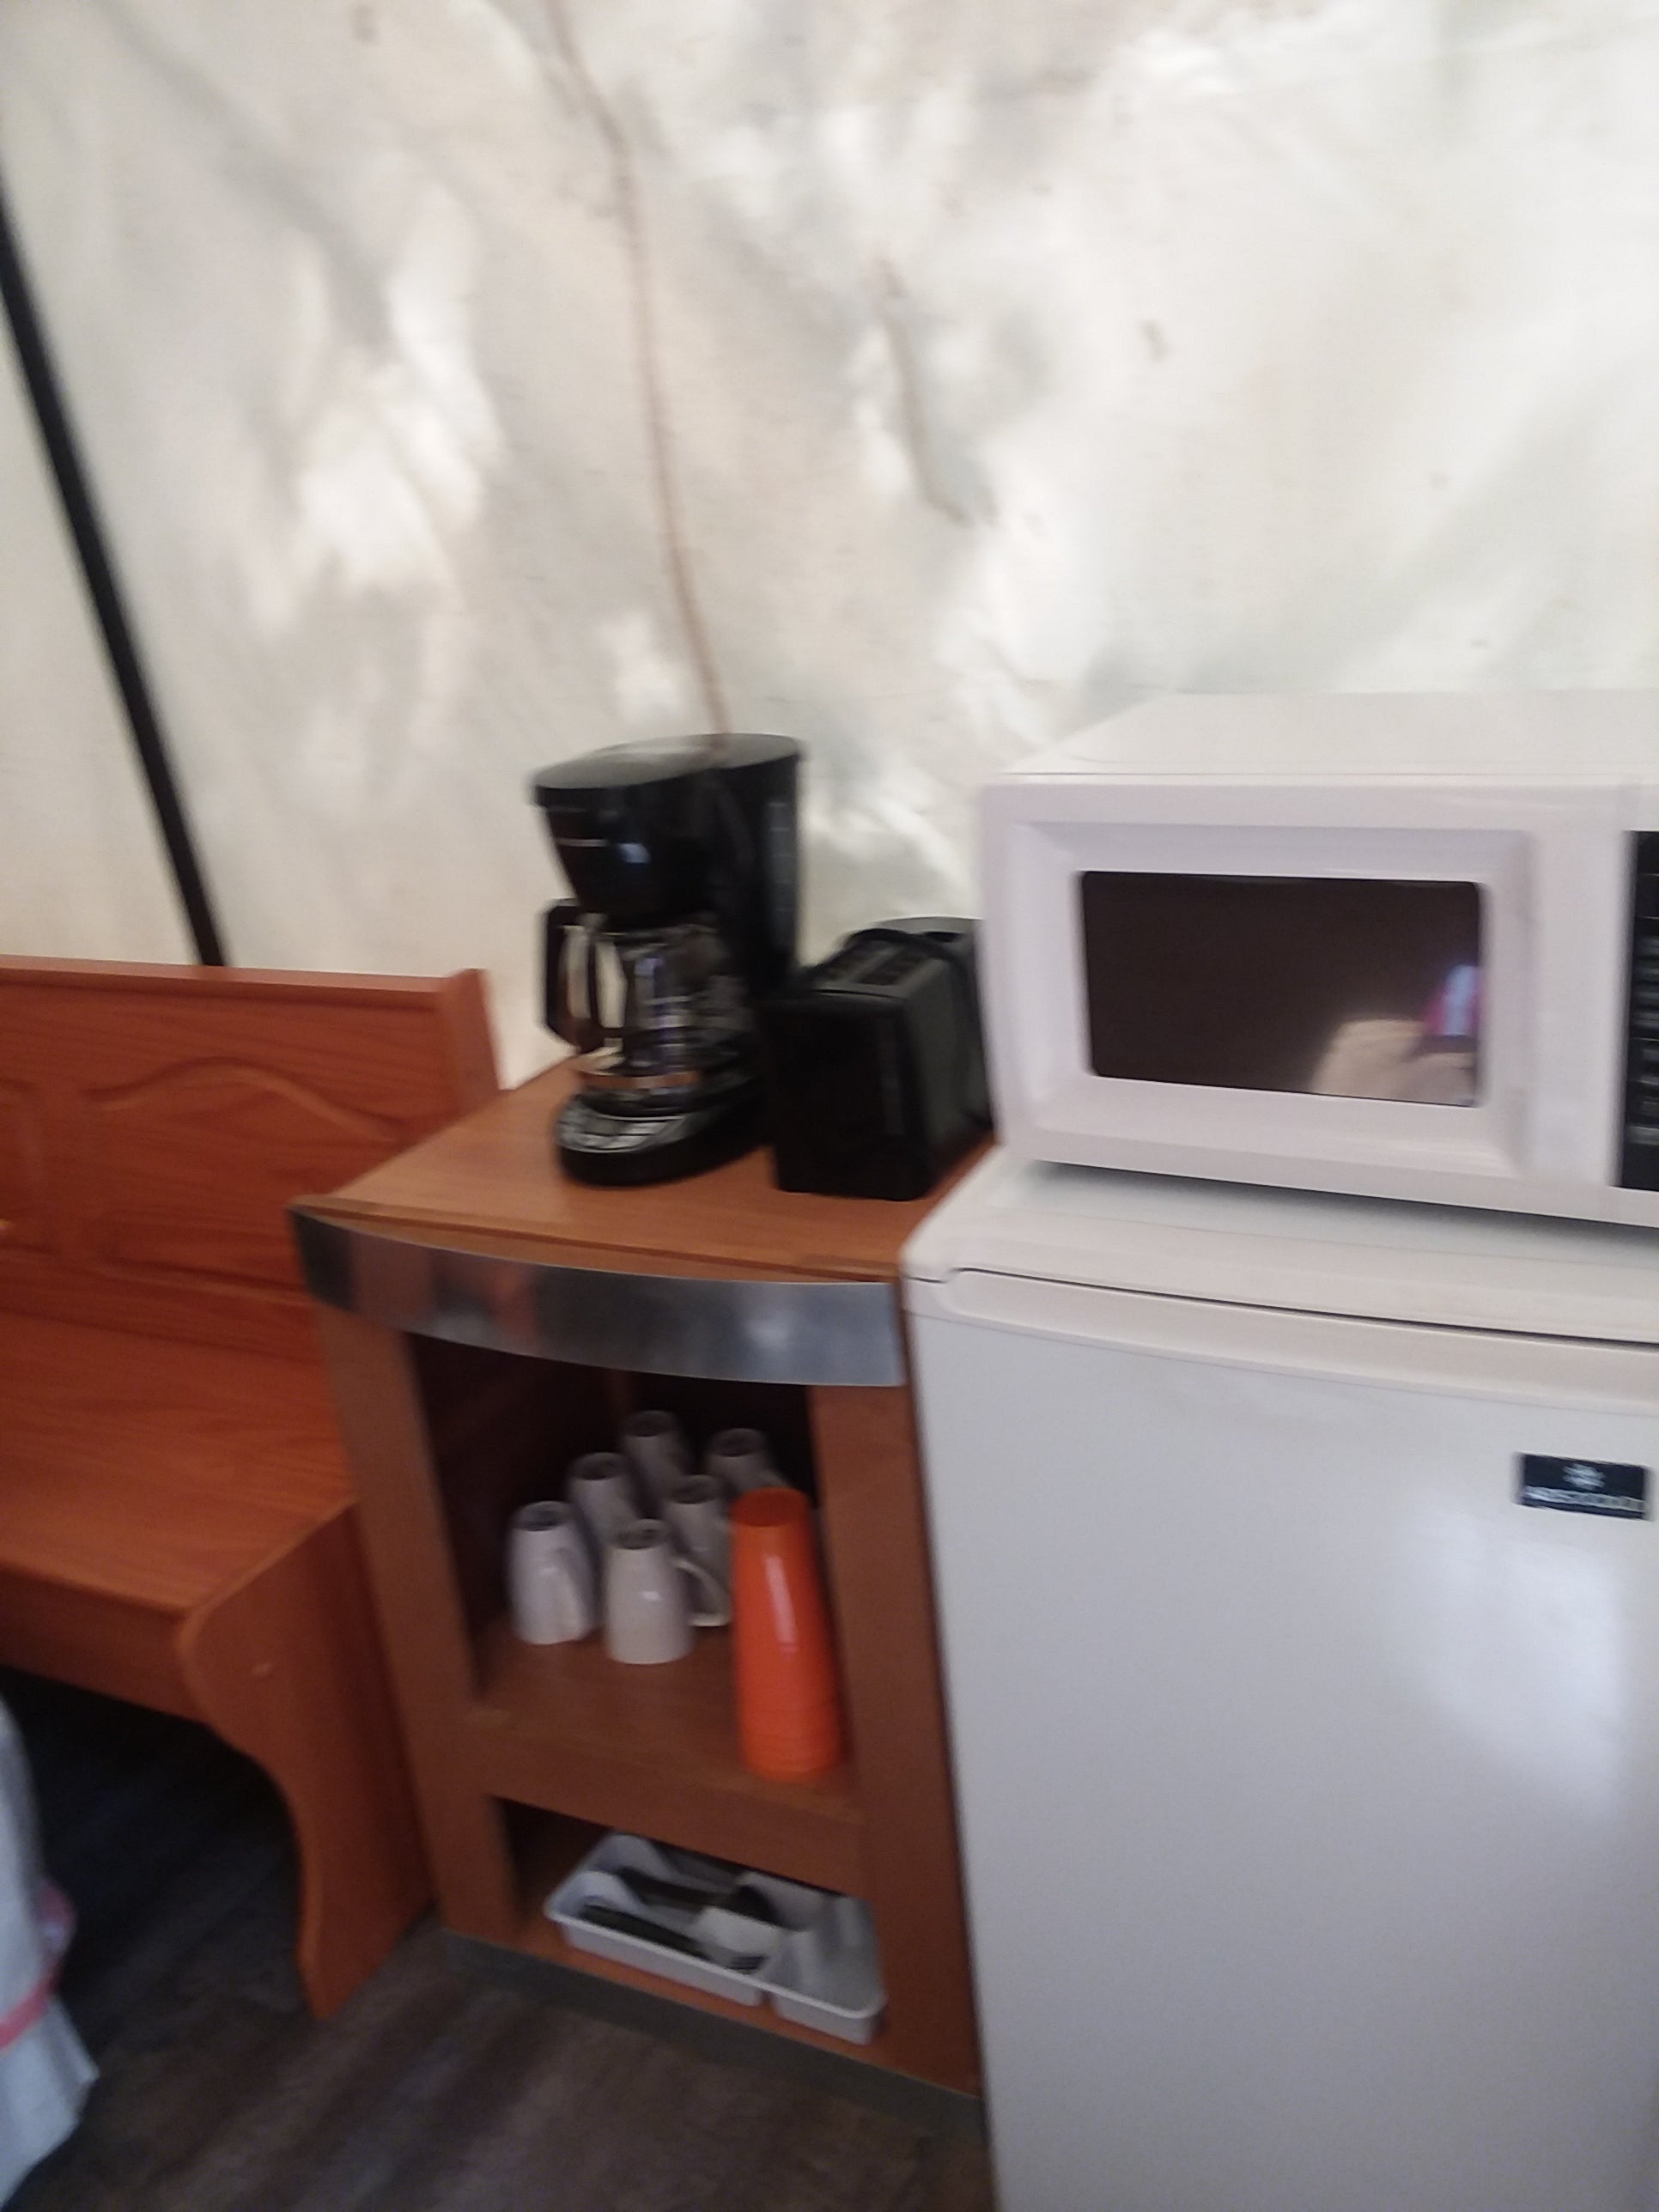 Frig microwave and coffee pot